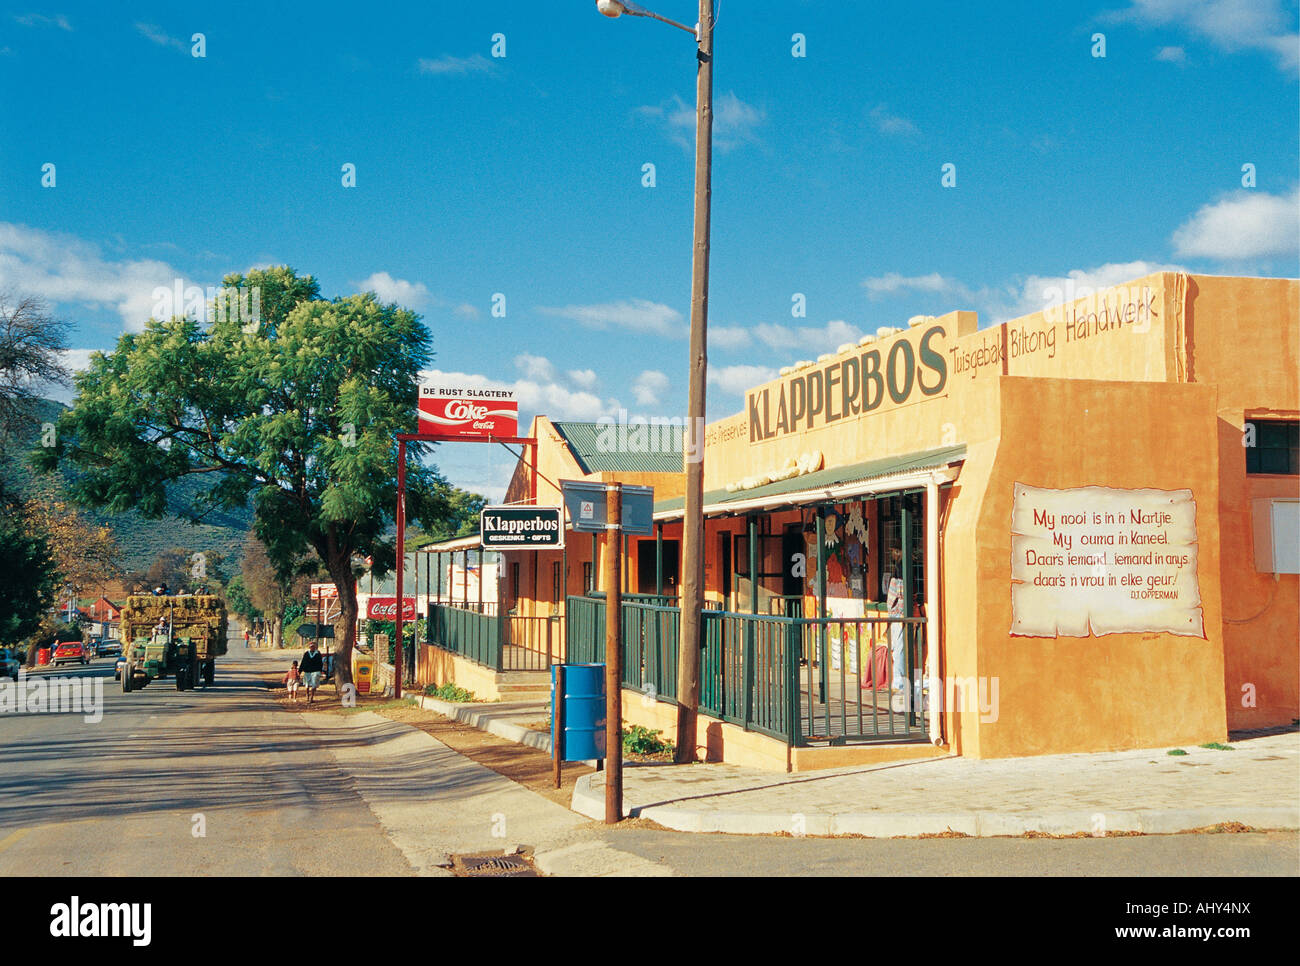 Village scene at De Rust Karoo South Africa There are many signs in the Afrikaans language Stock Photo